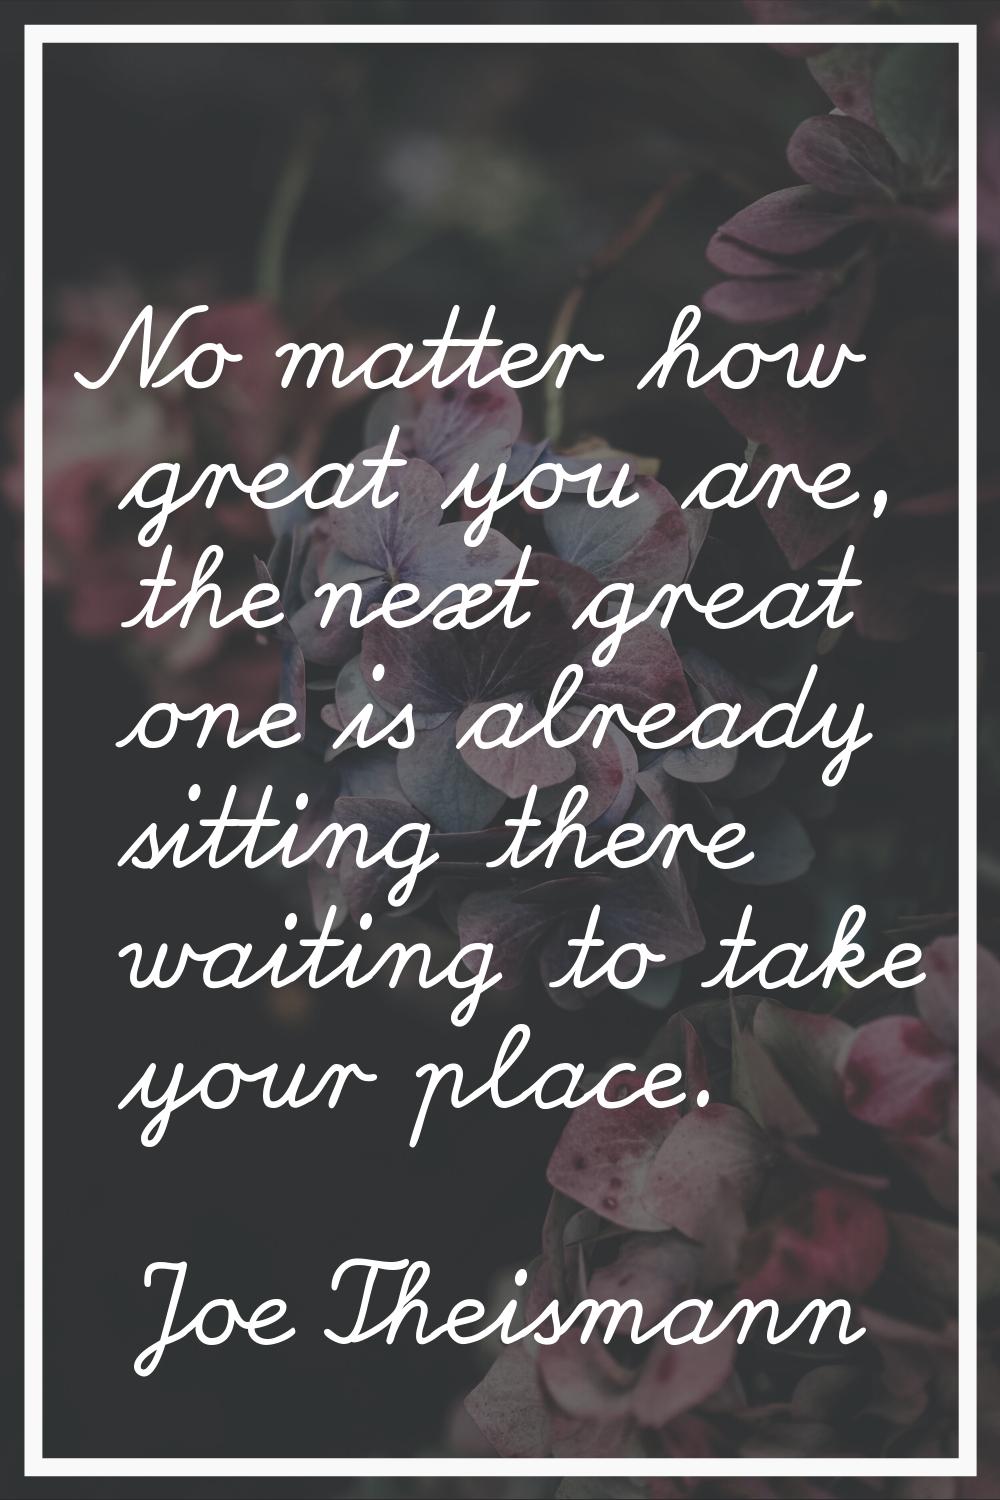 No matter how great you are, the next great one is already sitting there waiting to take your place